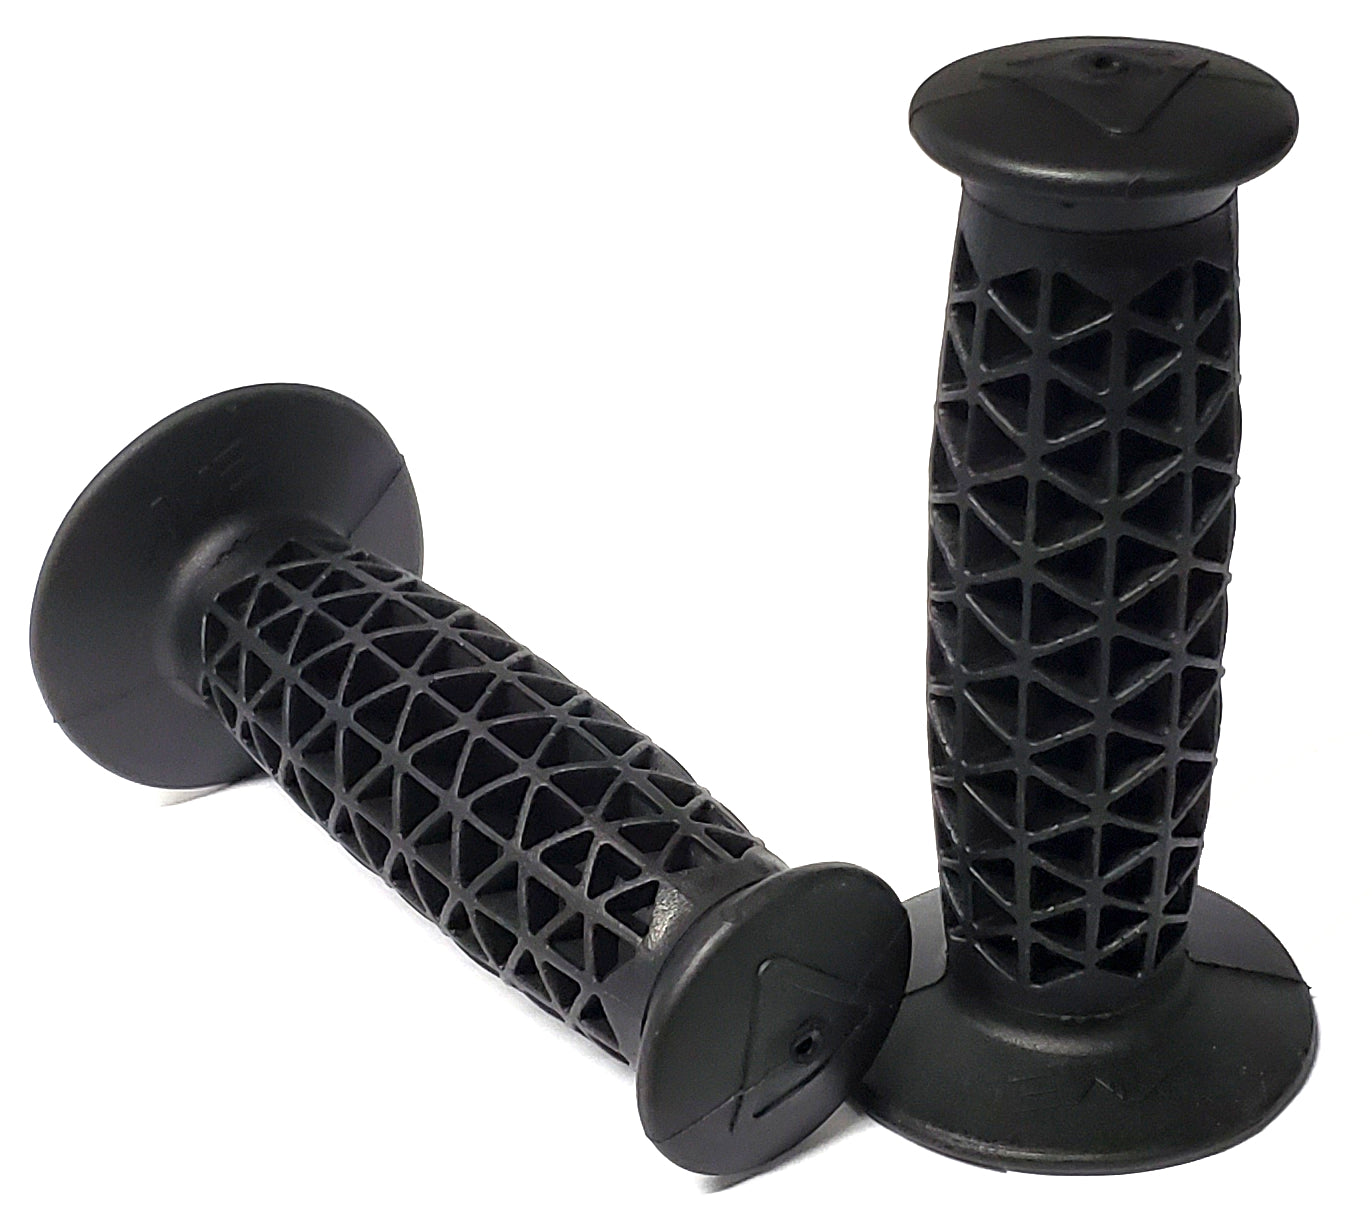 AME SuperSoft Flanged BMX Grips - Black - USA Made